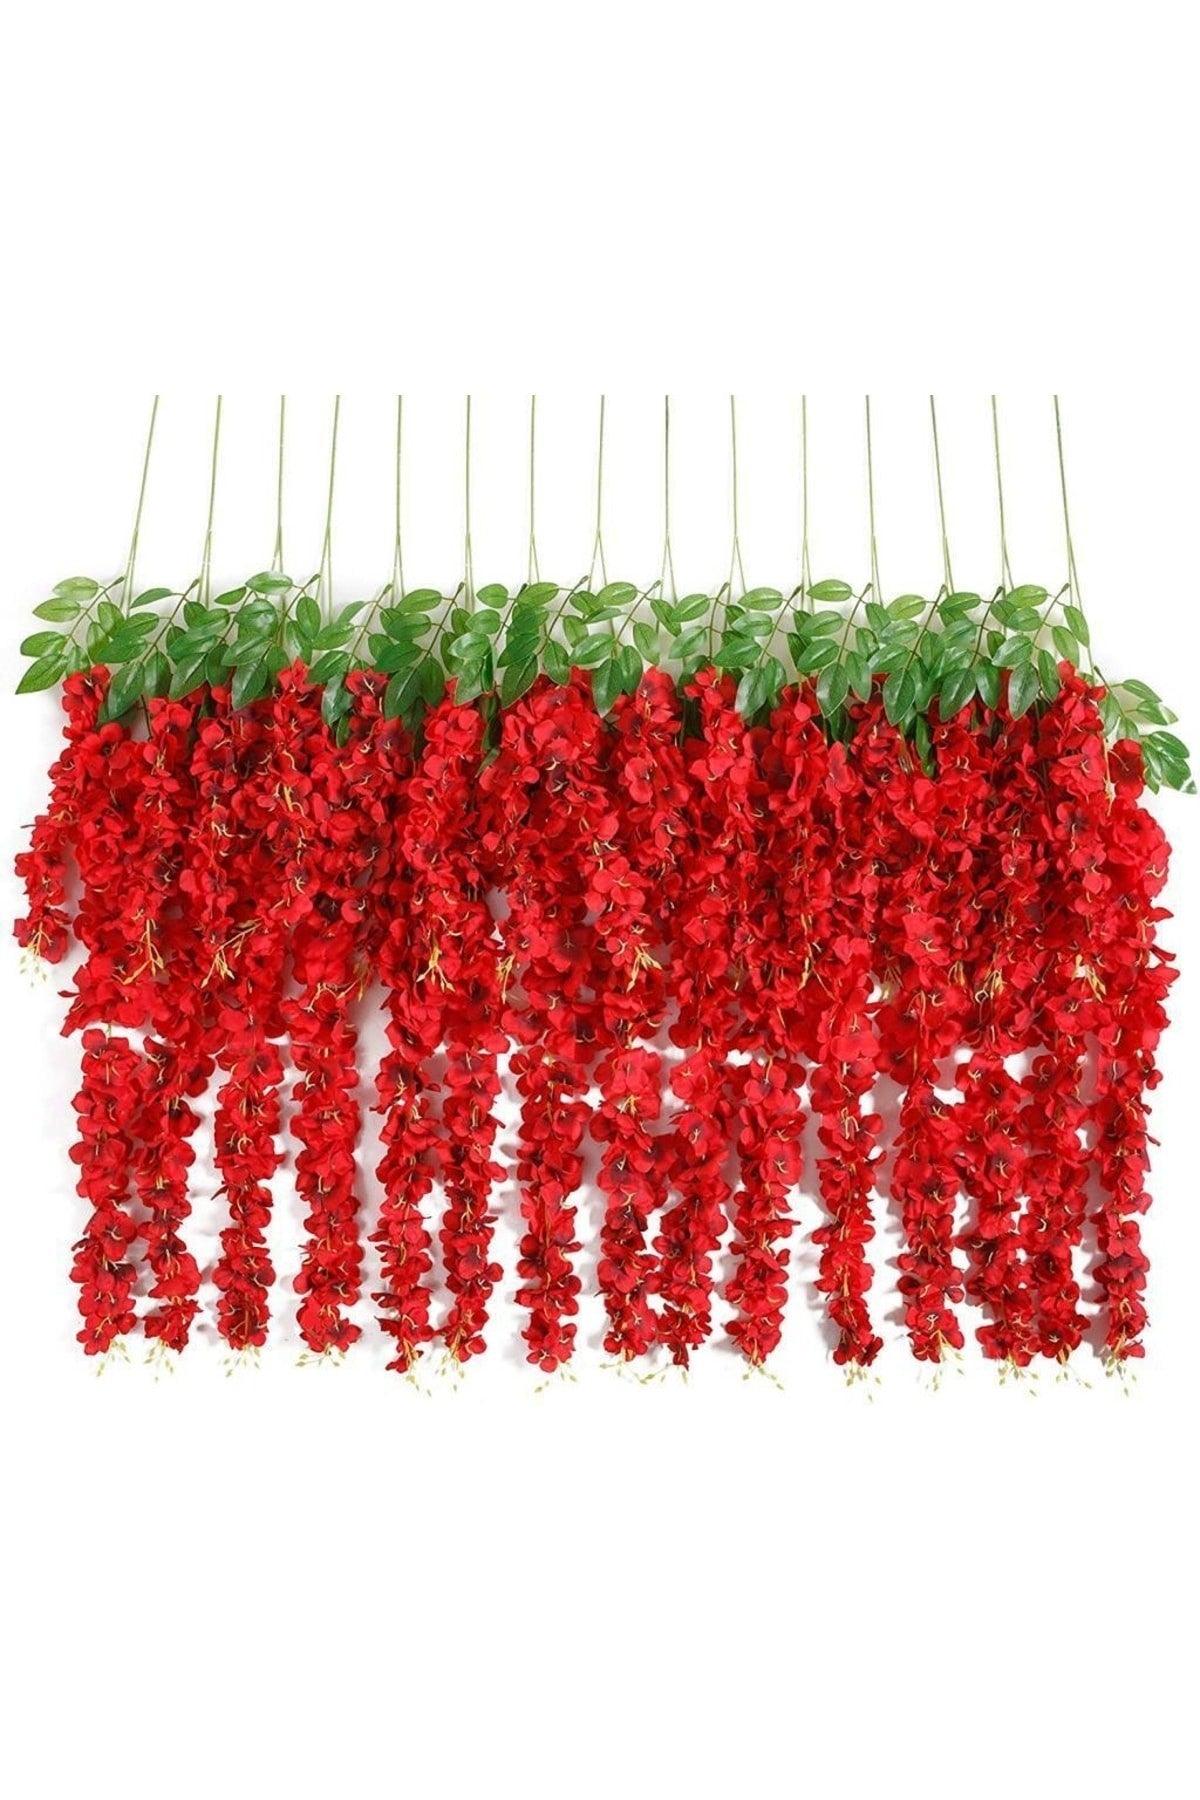 Dangling Artificial Flower Acacia Red 80 Cm 12 Pieces Vineyard With 3 Dangling Branches - Swordslife